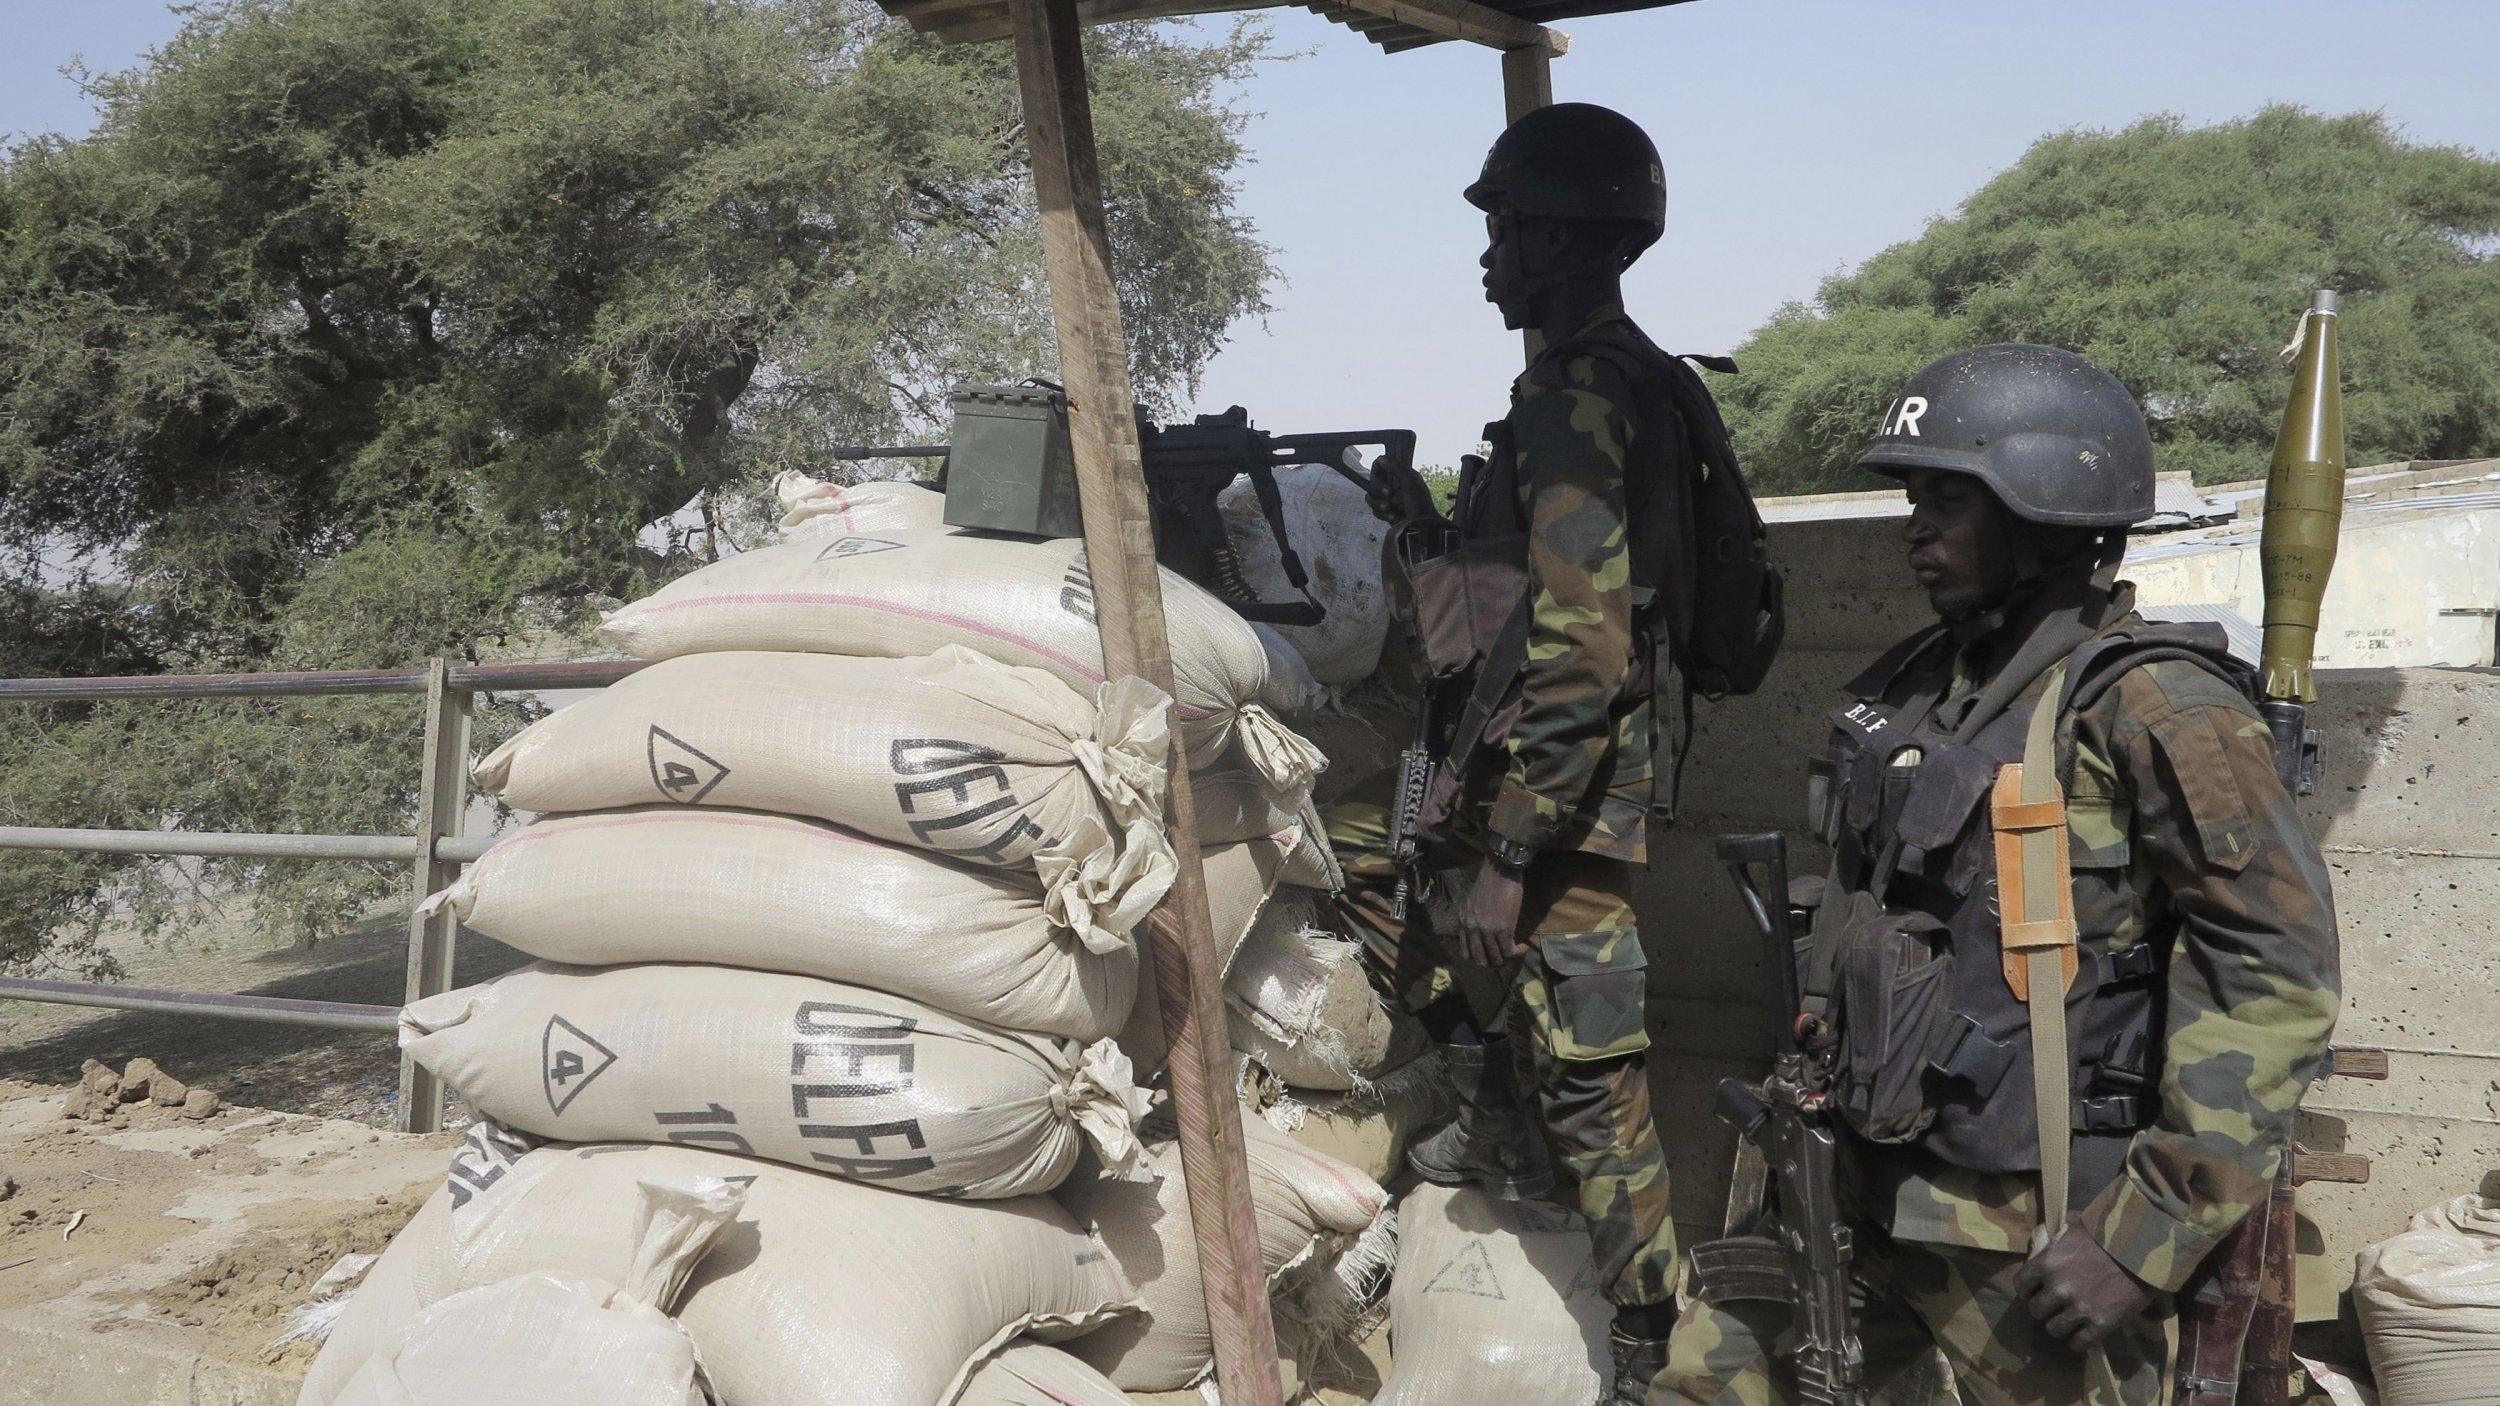 Cameroonian soldiers stand guard in an area attacked by Boko Haram.